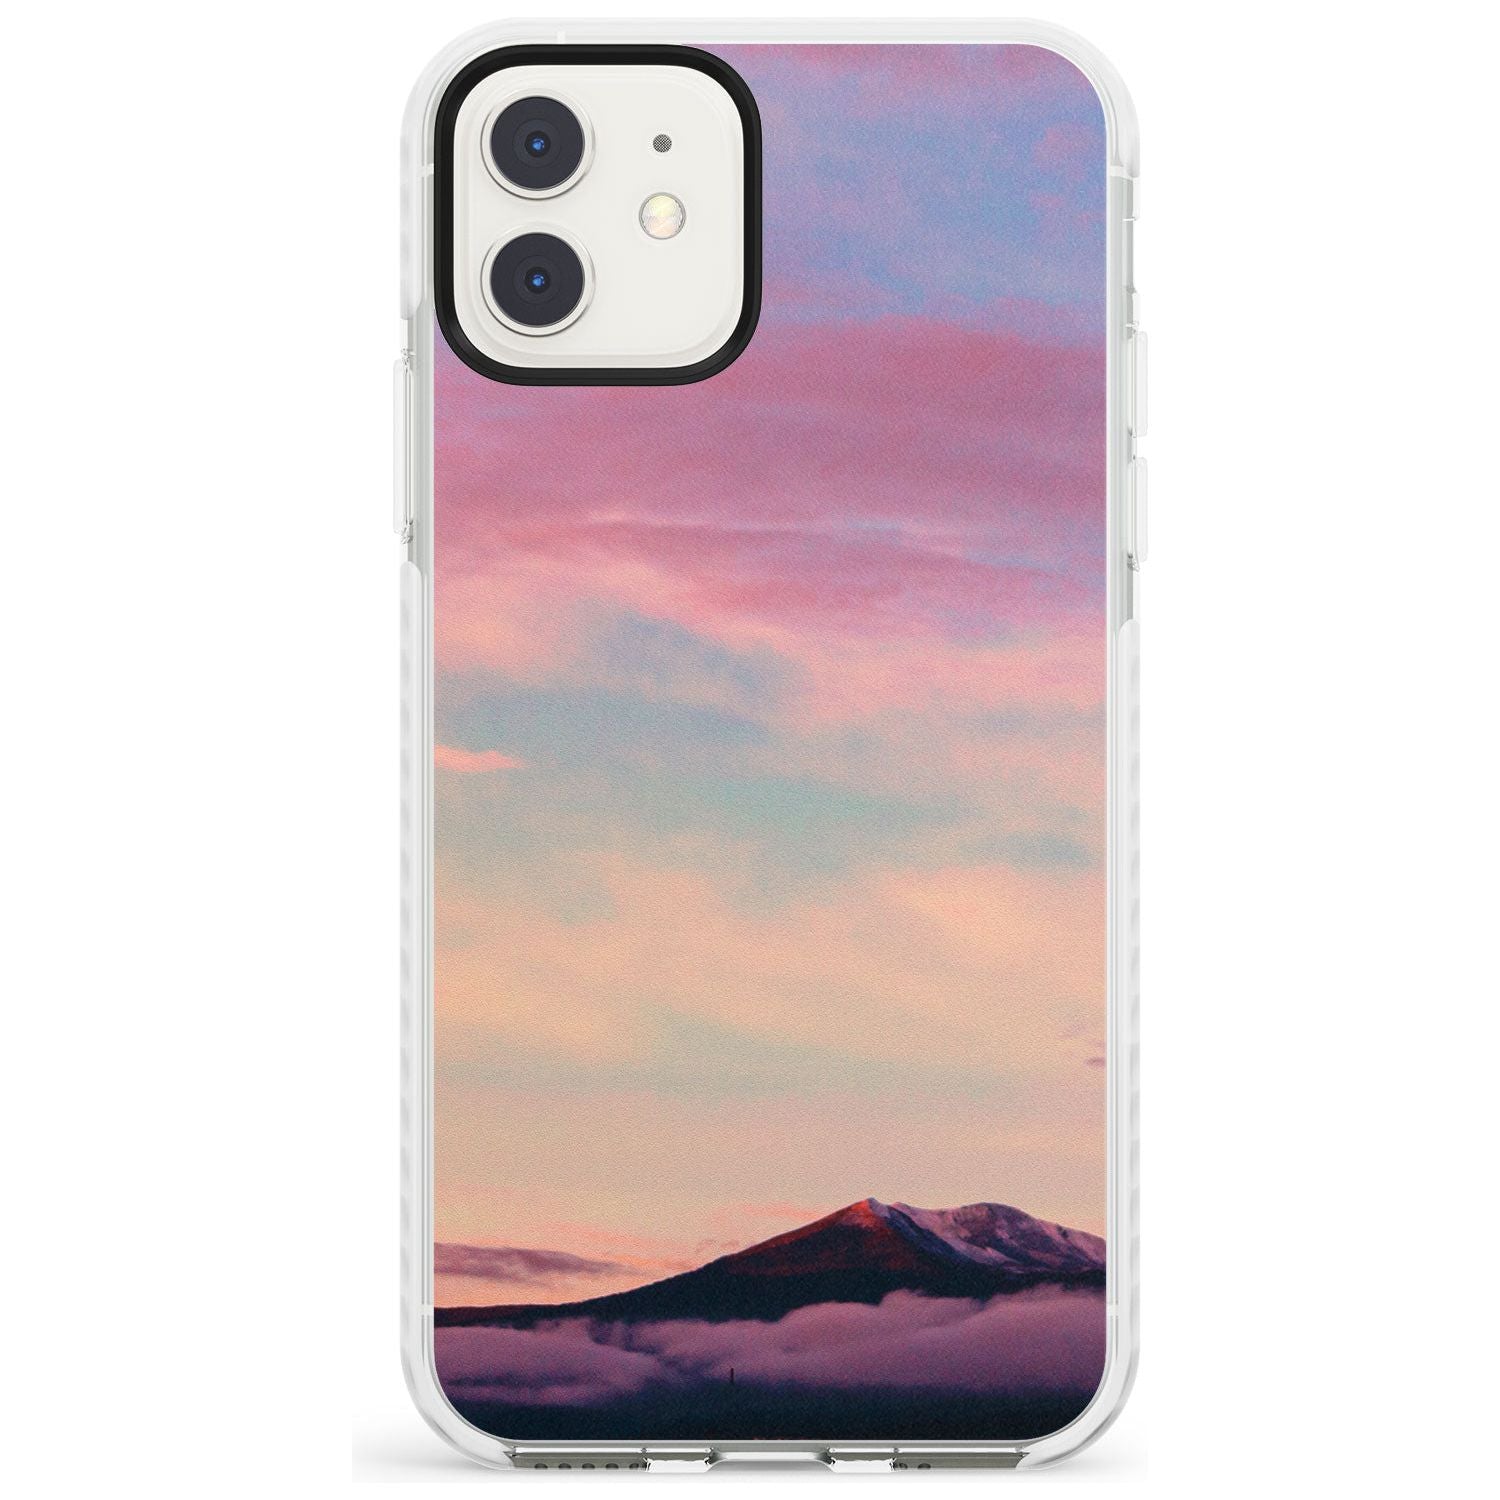 Cloudy Sunset Photograph Impact Phone Case for iPhone 11